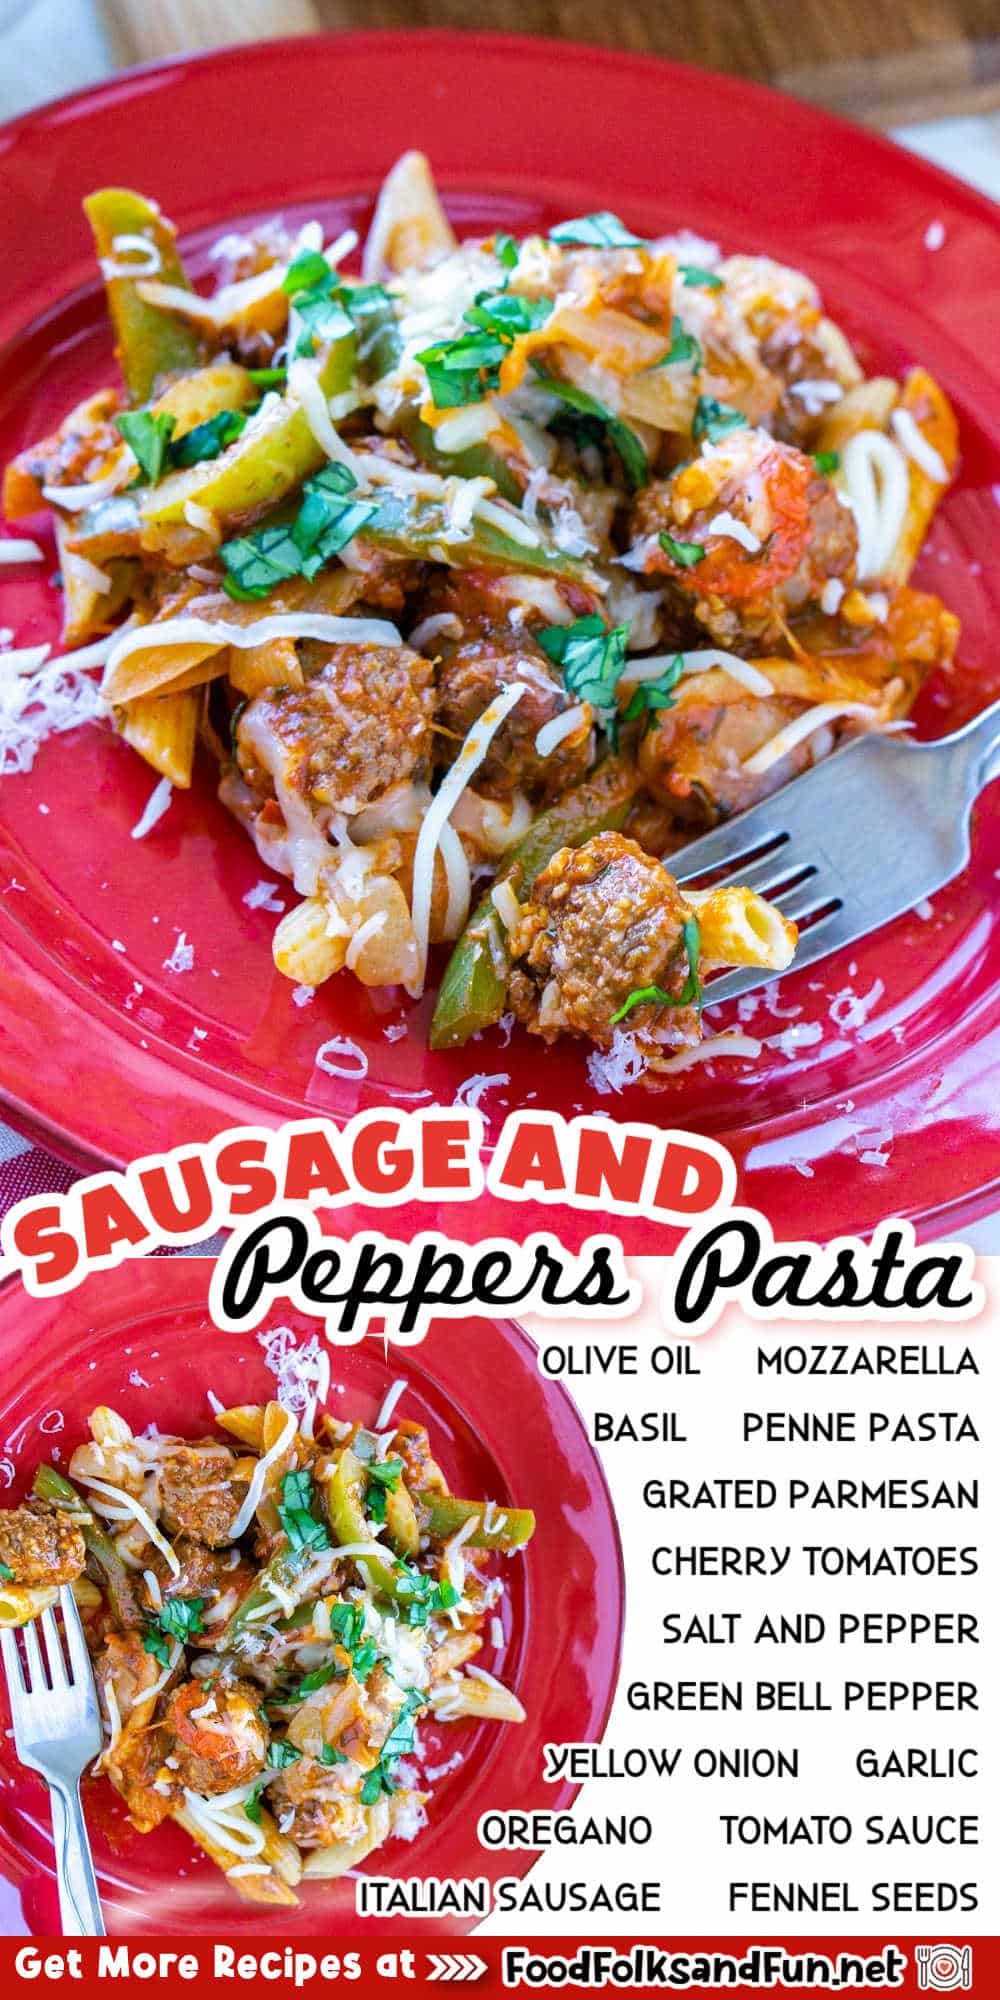 This Sausage and Peppers Pasta recipe is a quick and easy version of the slow-cooked Italian classic. It's vibrant, delicious, and great for busy weeknights! via @foodfolksandfun